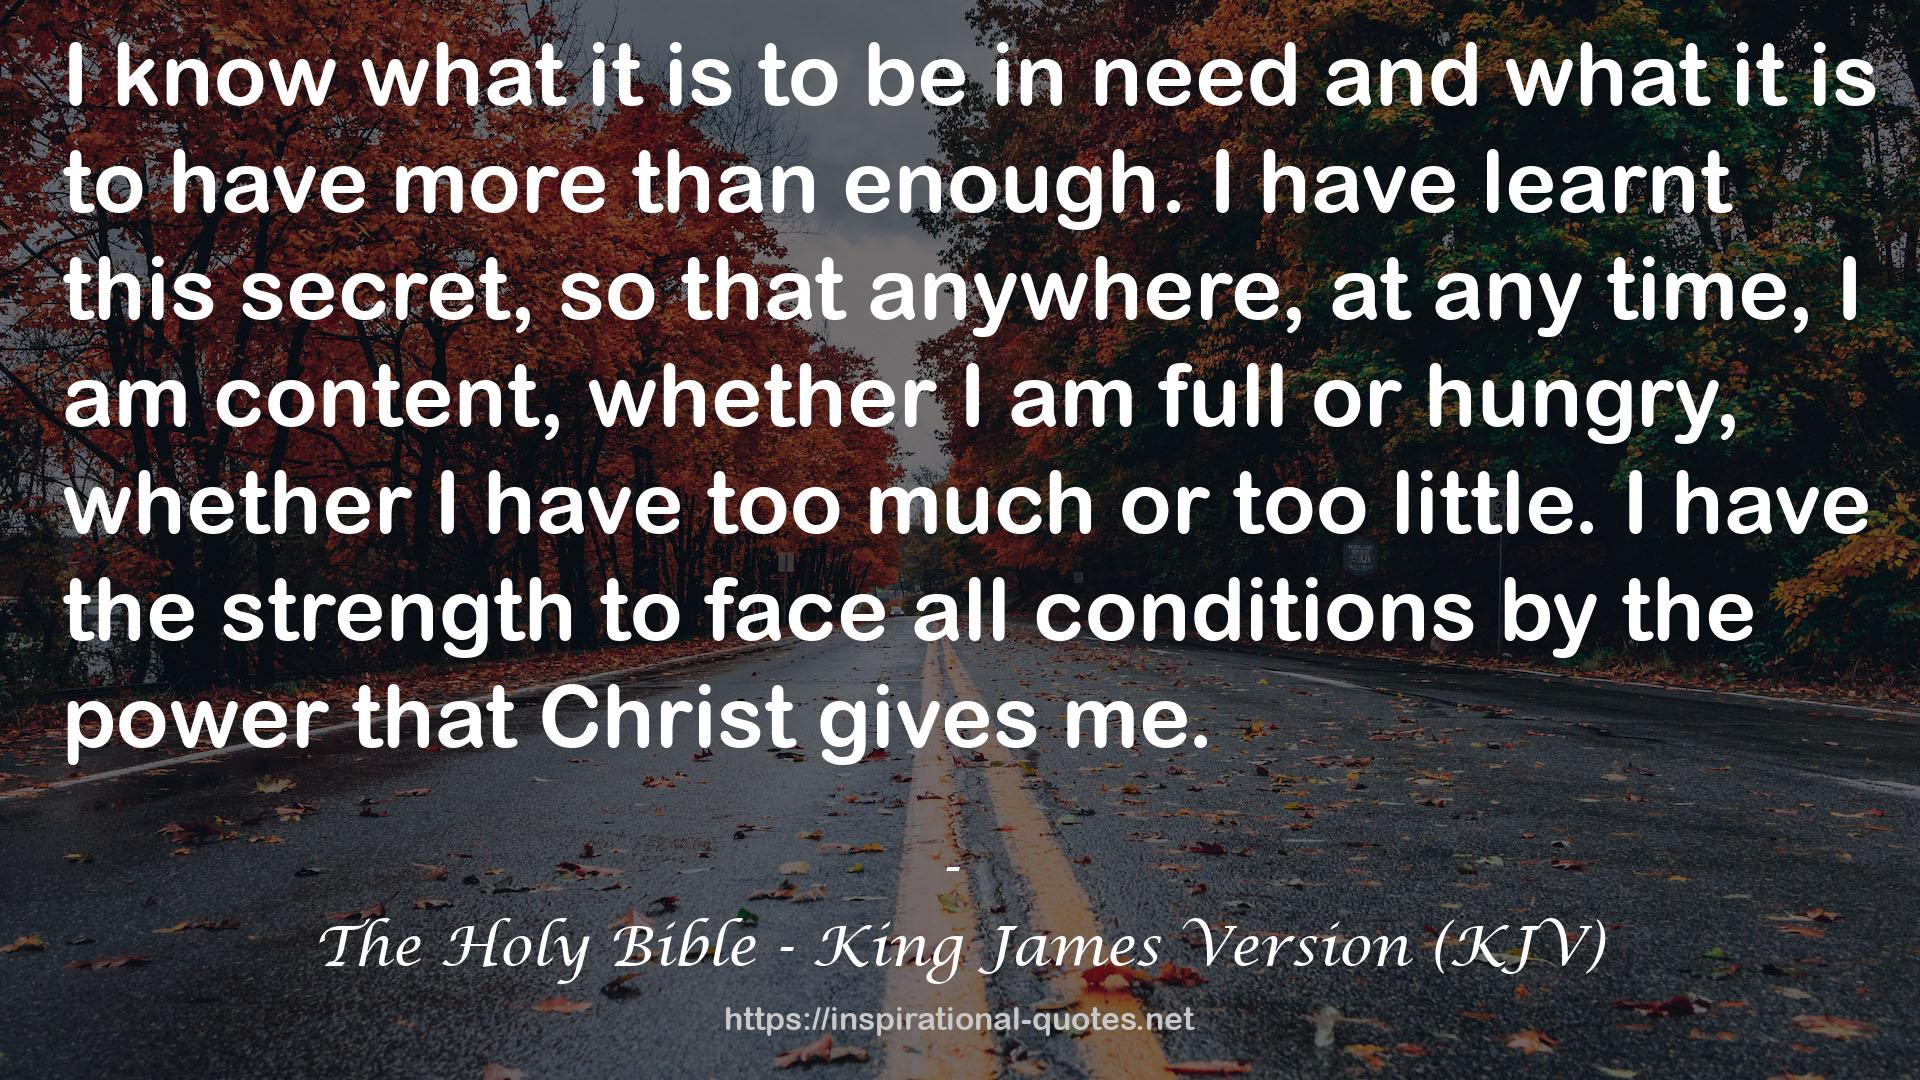 The Holy Bible - King James Version (KJV) QUOTES